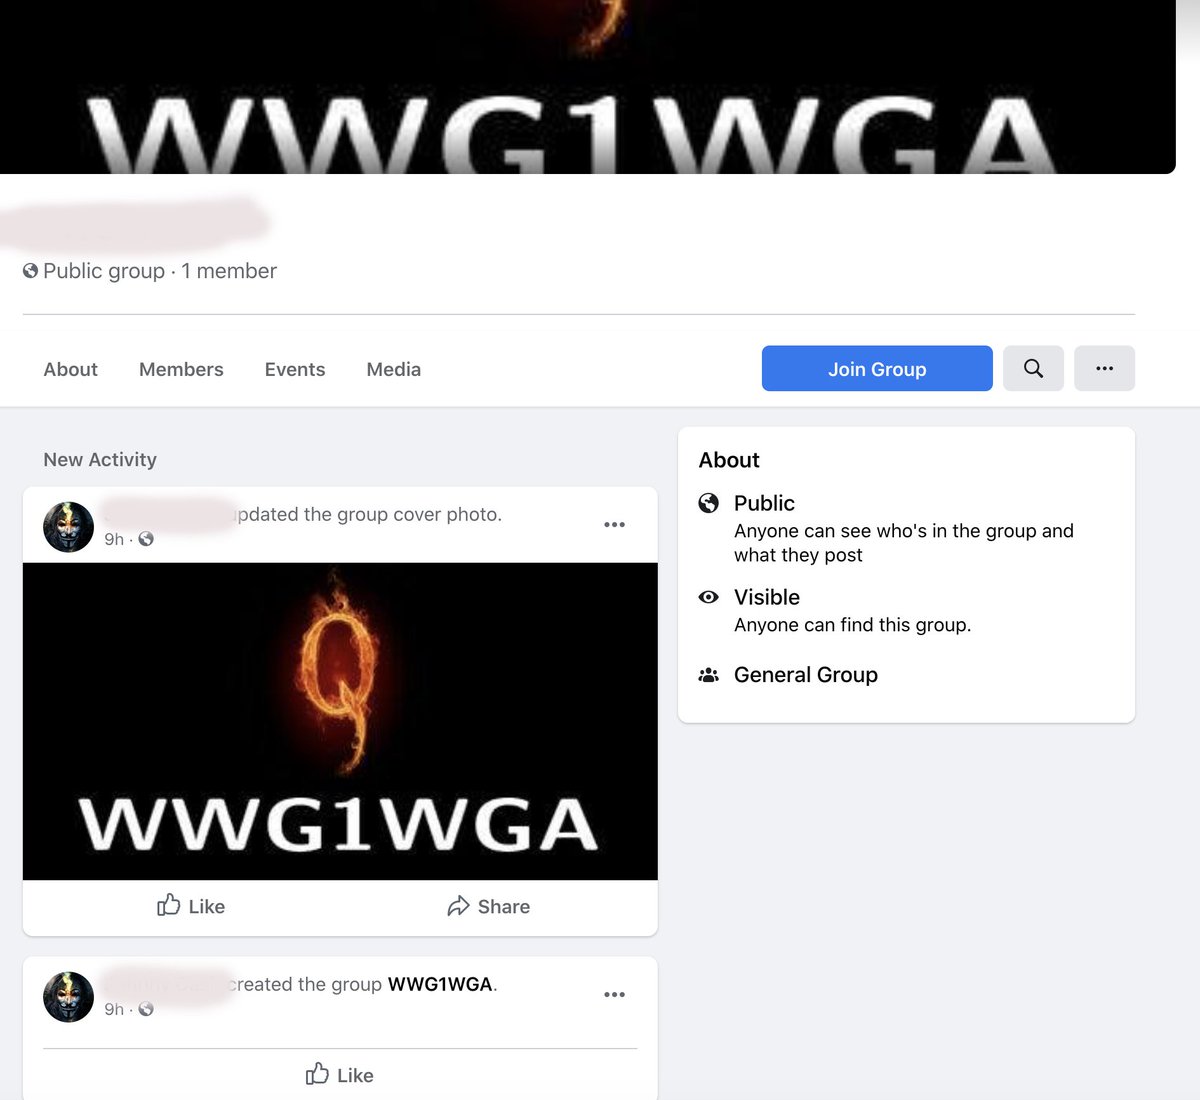 It's not even 24hrs since Facebook's axe fell on QAnon, and several new groups have already been created today. Don't for a moment assume that the digital soldiers will just go away. They will return. Not once, but repeatedly. We'll find out soon whether Facebook can keep track.